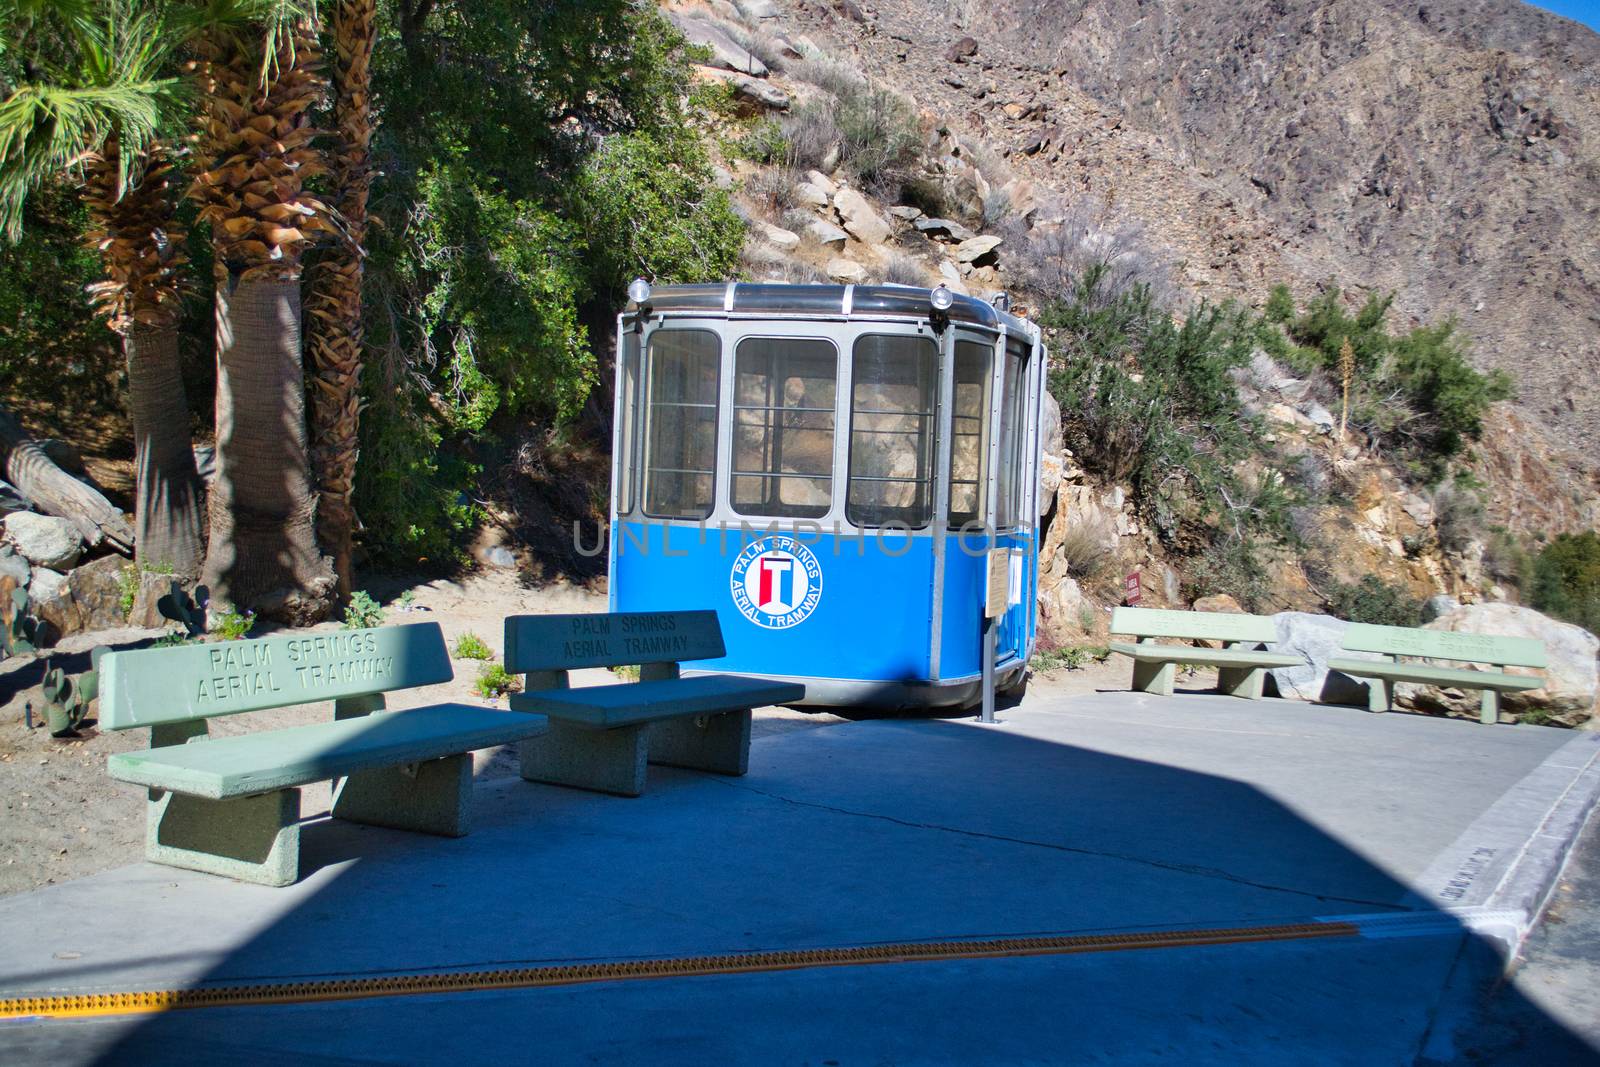 Blue carriage of Aerial Tramway of Palm Springs by kb79